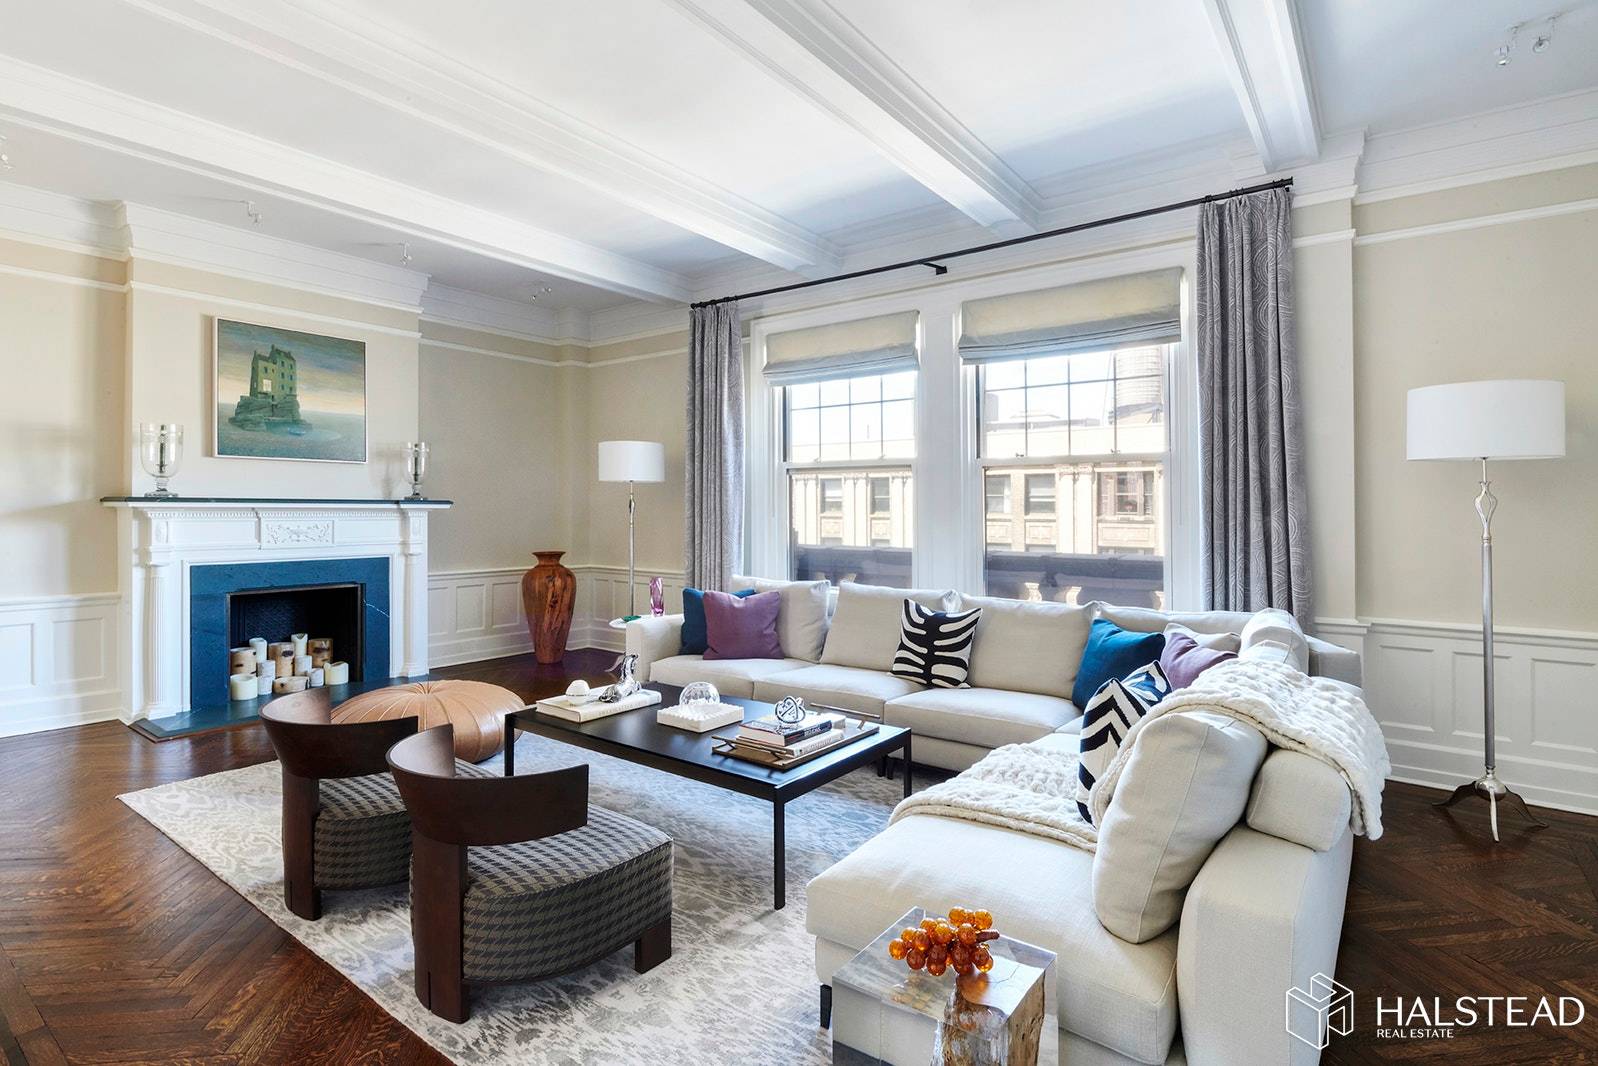 Lovingly restored to it's 1912 grandeur, this classic 7 prewar condo is a prime example of European style living.